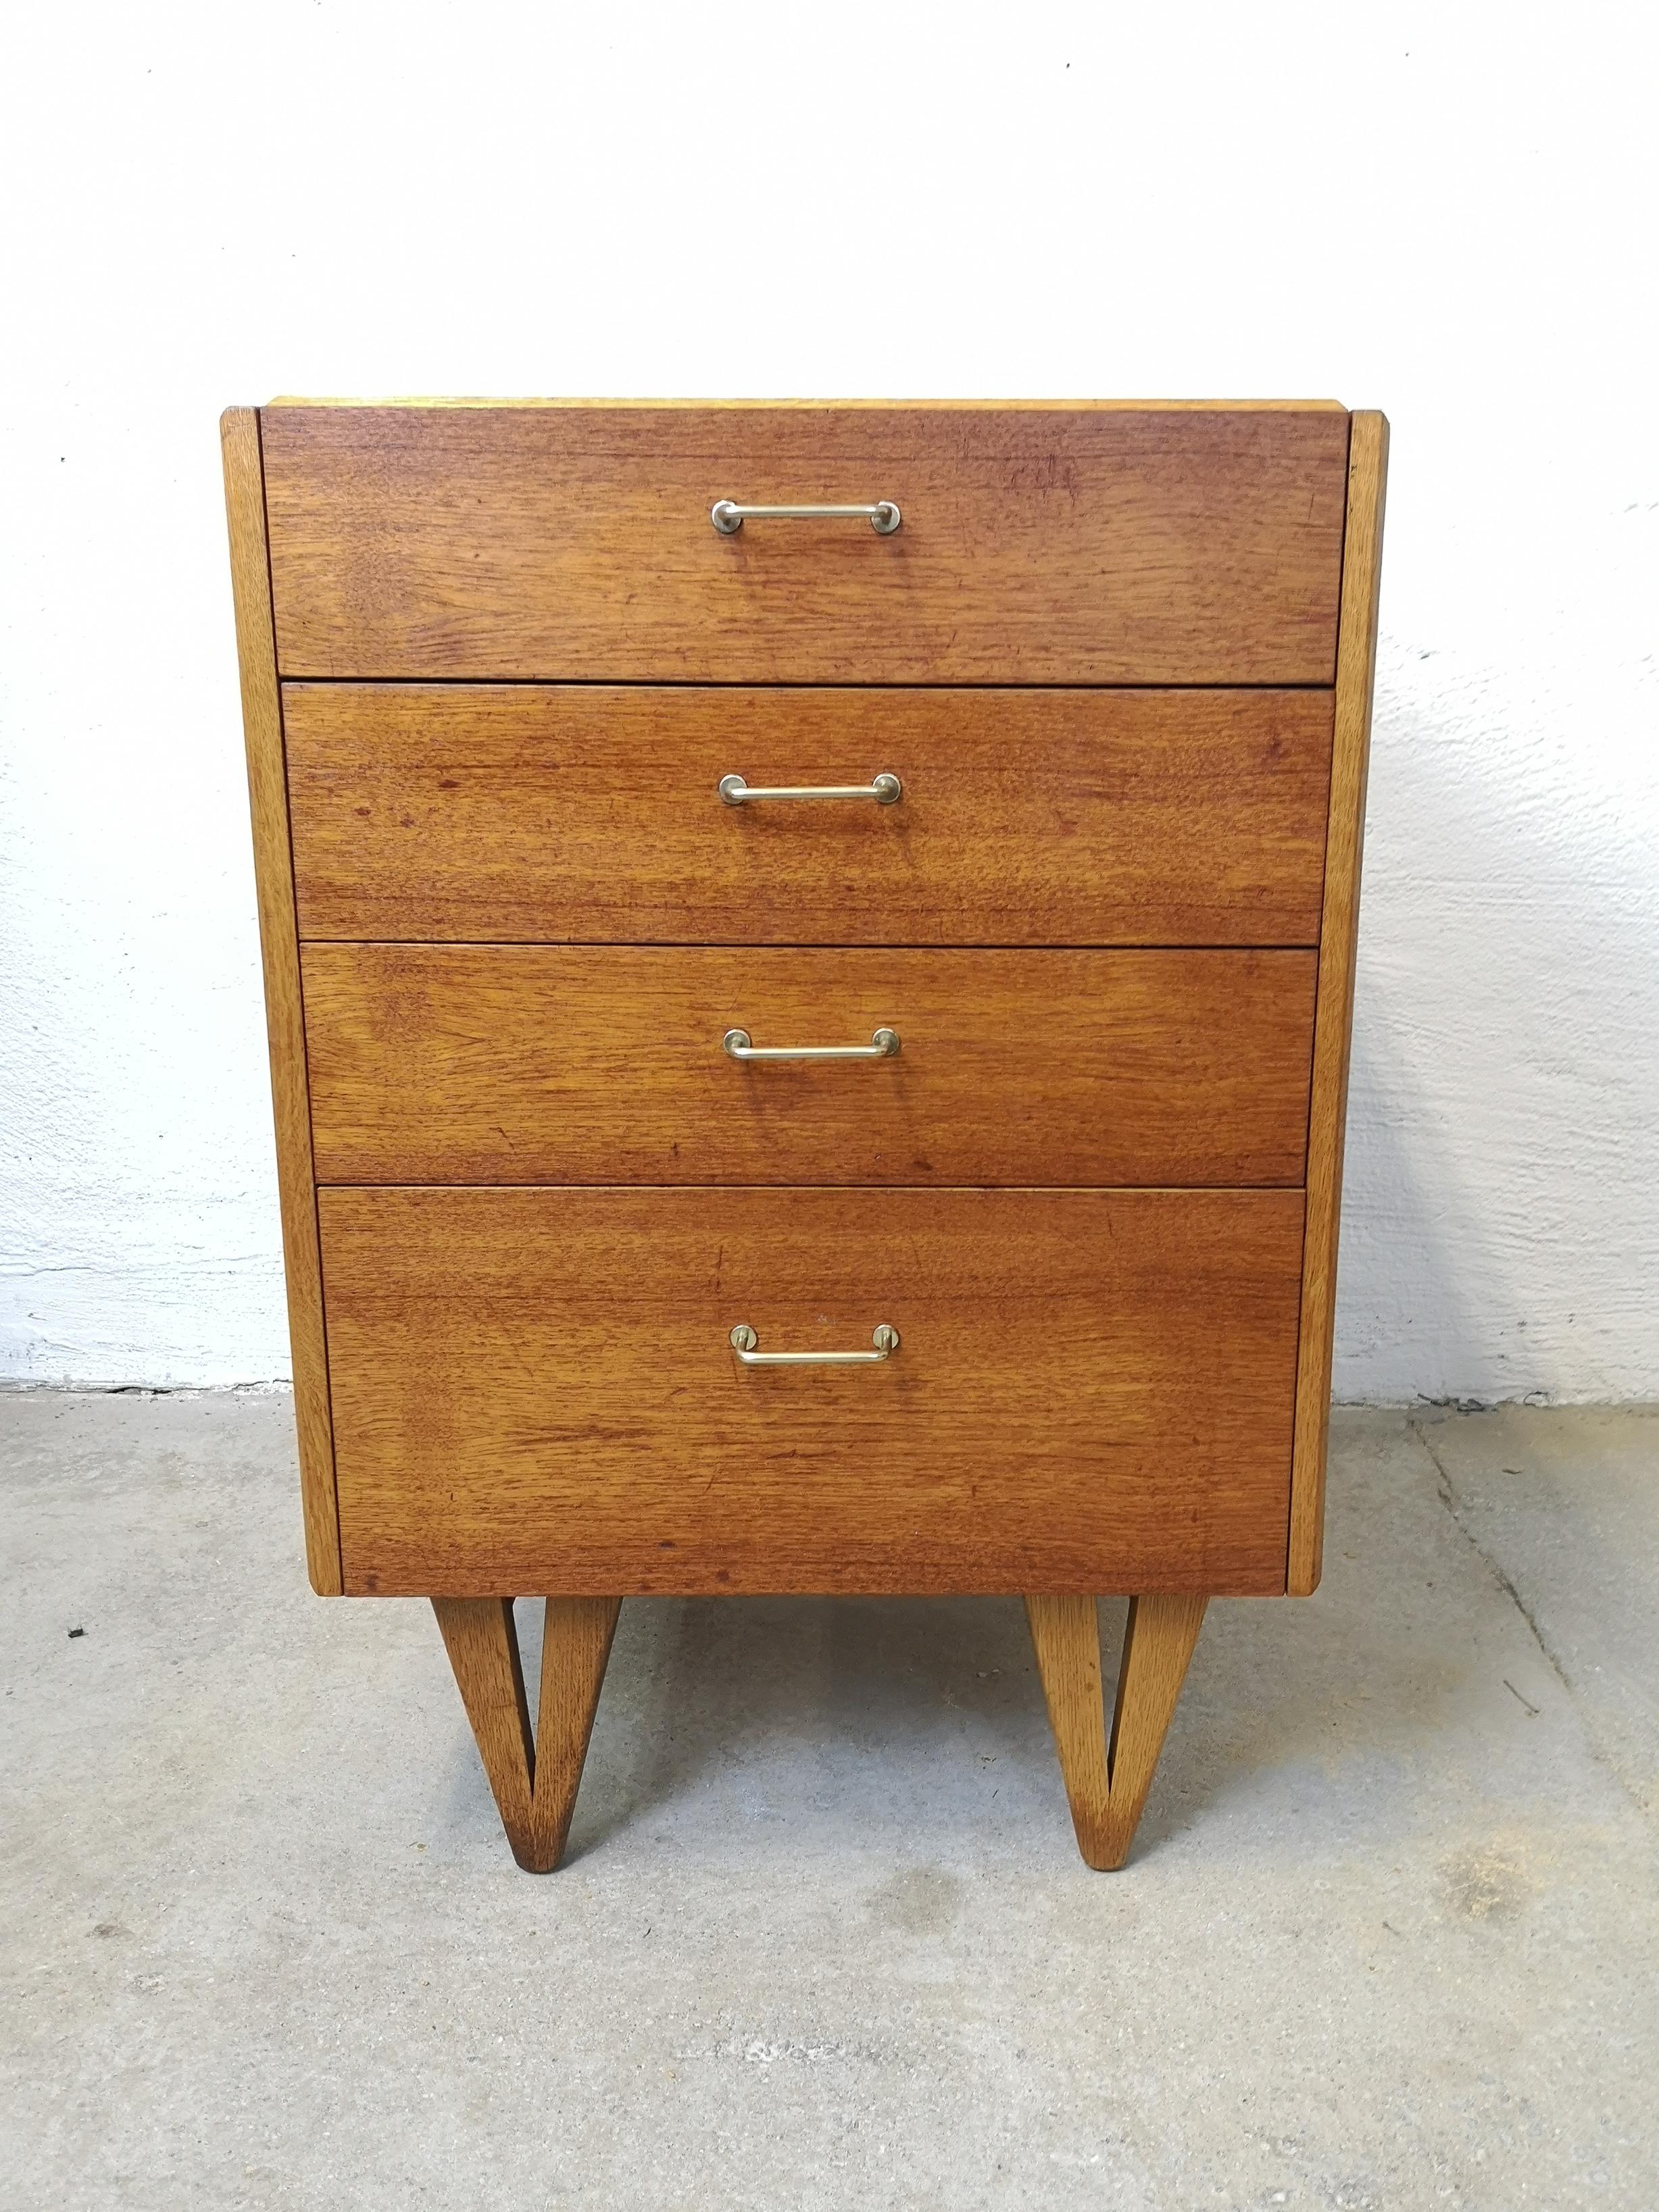 This nicely done dresser was designed by Bengt Ruda in Sweden, 1950s. The structure of the base has a nice design and the dresser itself it’s in good teak color and nice vintage shape.

Good vintage condition.

Good vintage